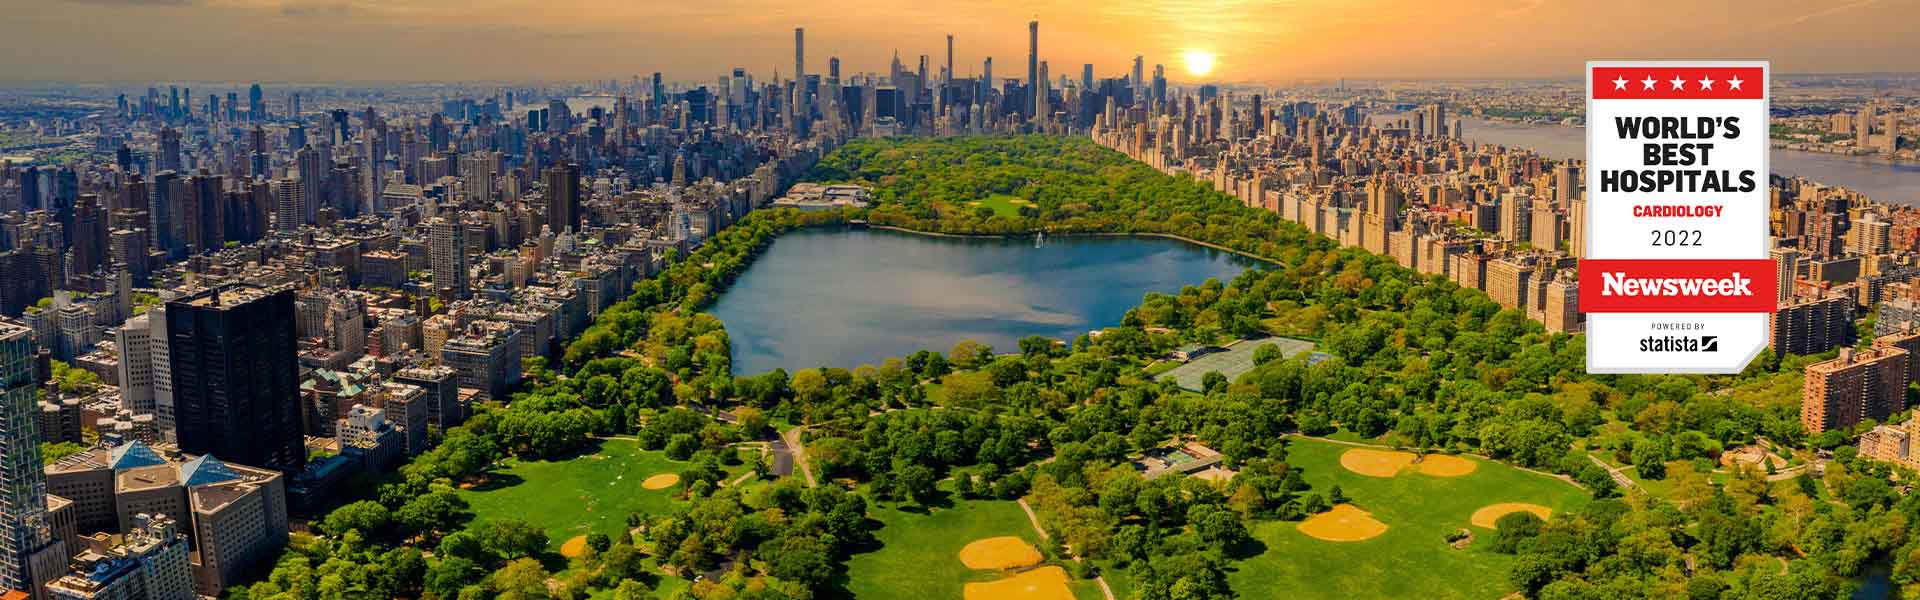 NYC and Central Park